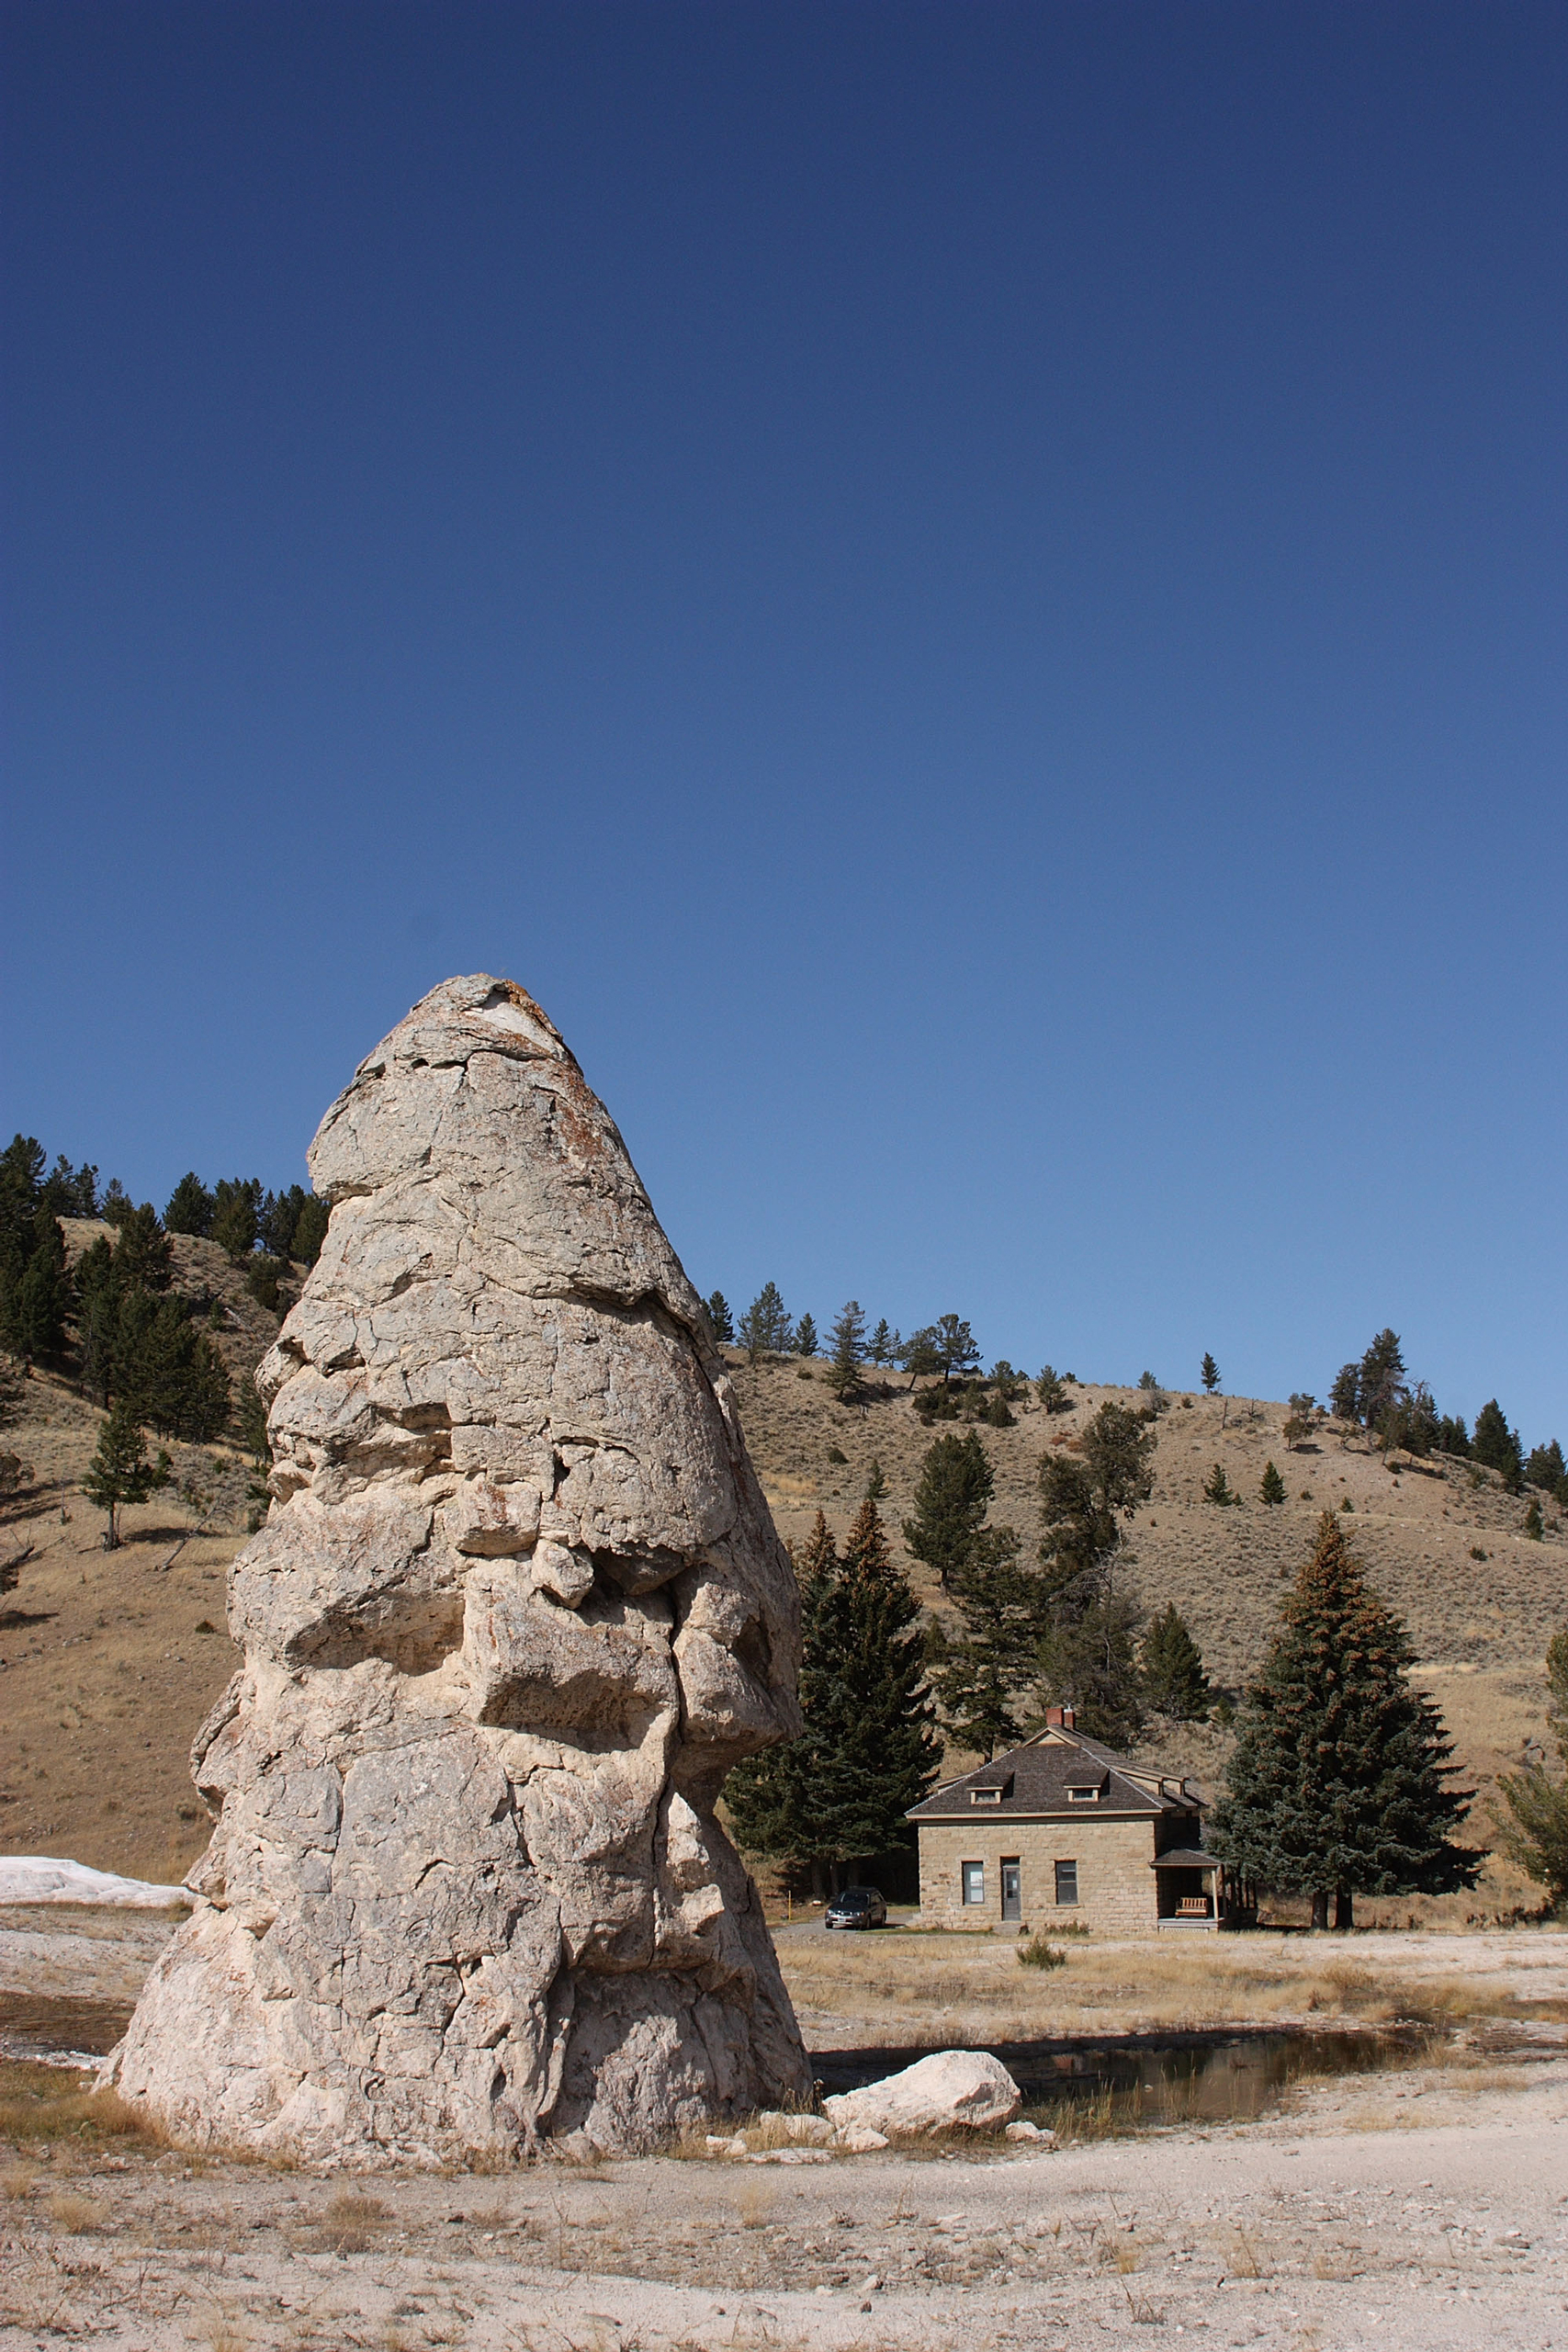 The rock structure known as Liberty Cap in the Mammoth Hot Springs area of Yellowstone National Park on Oct. 8, 2008. (Nina Raingold—Getty Images)